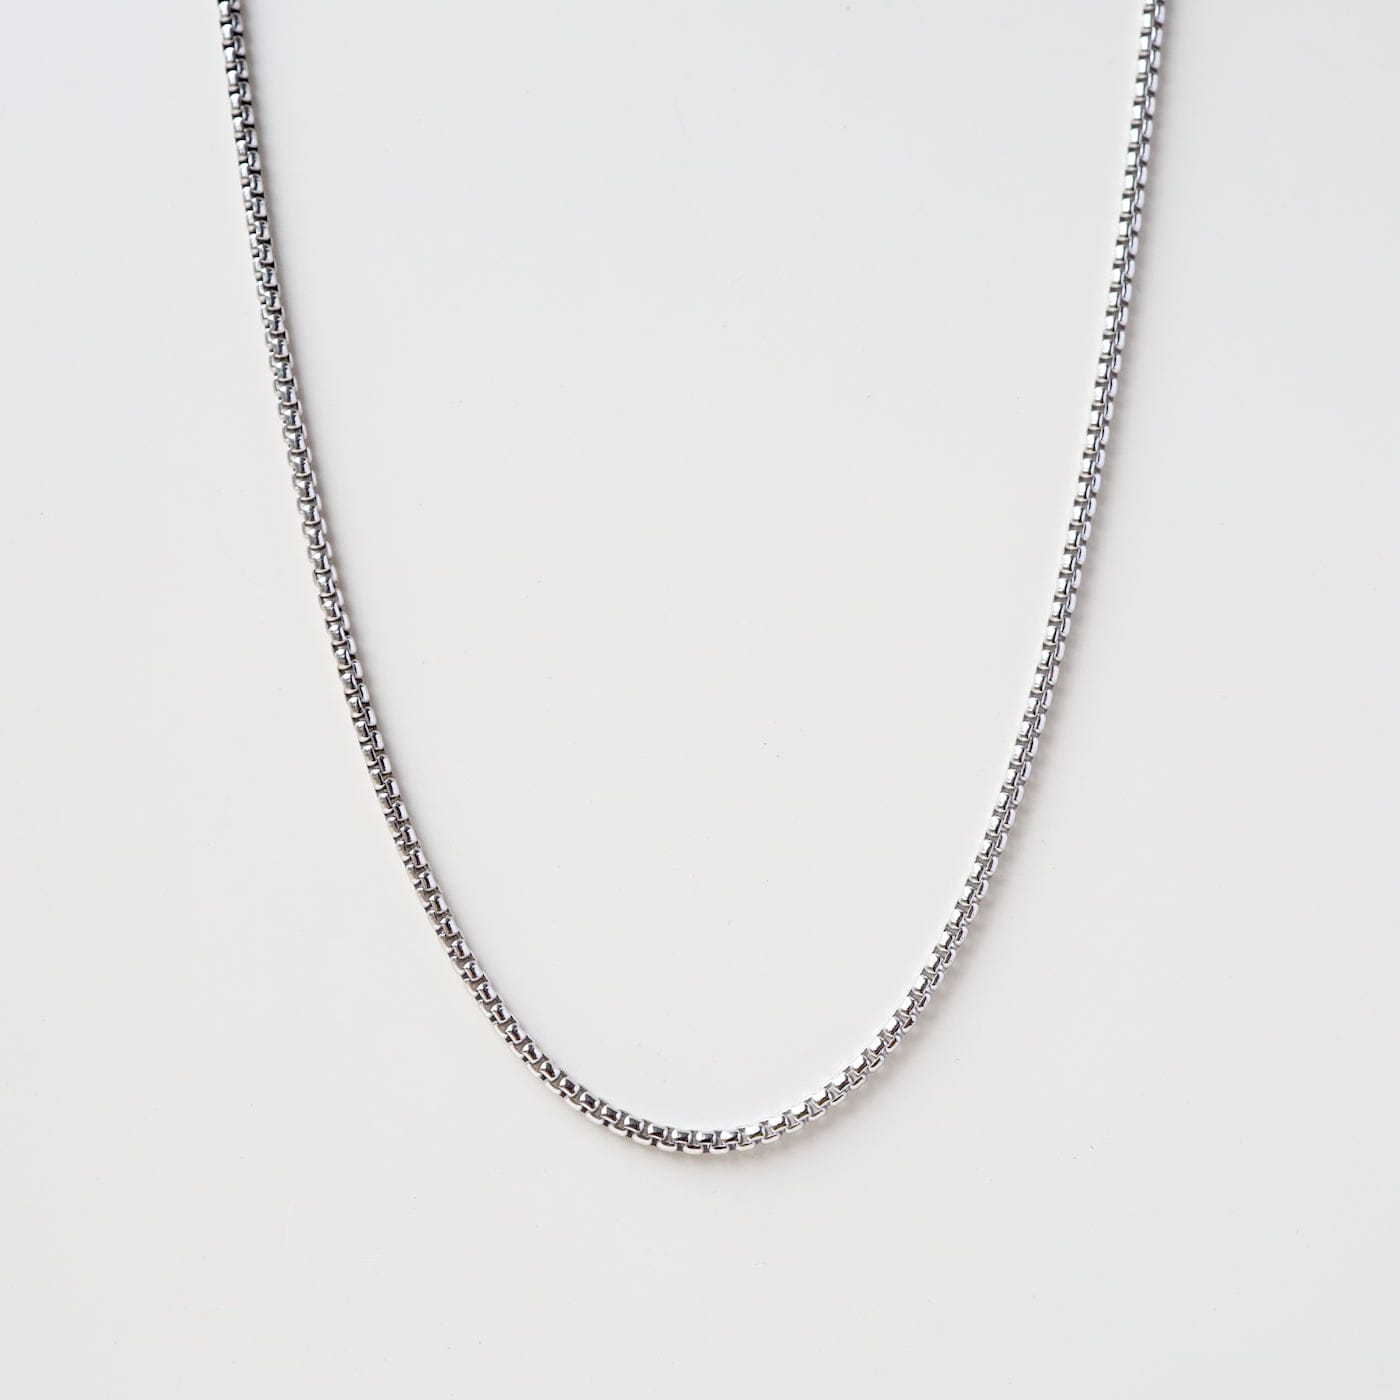 CHN Rhodium Plated Silver Rounded Box Chain - 16"